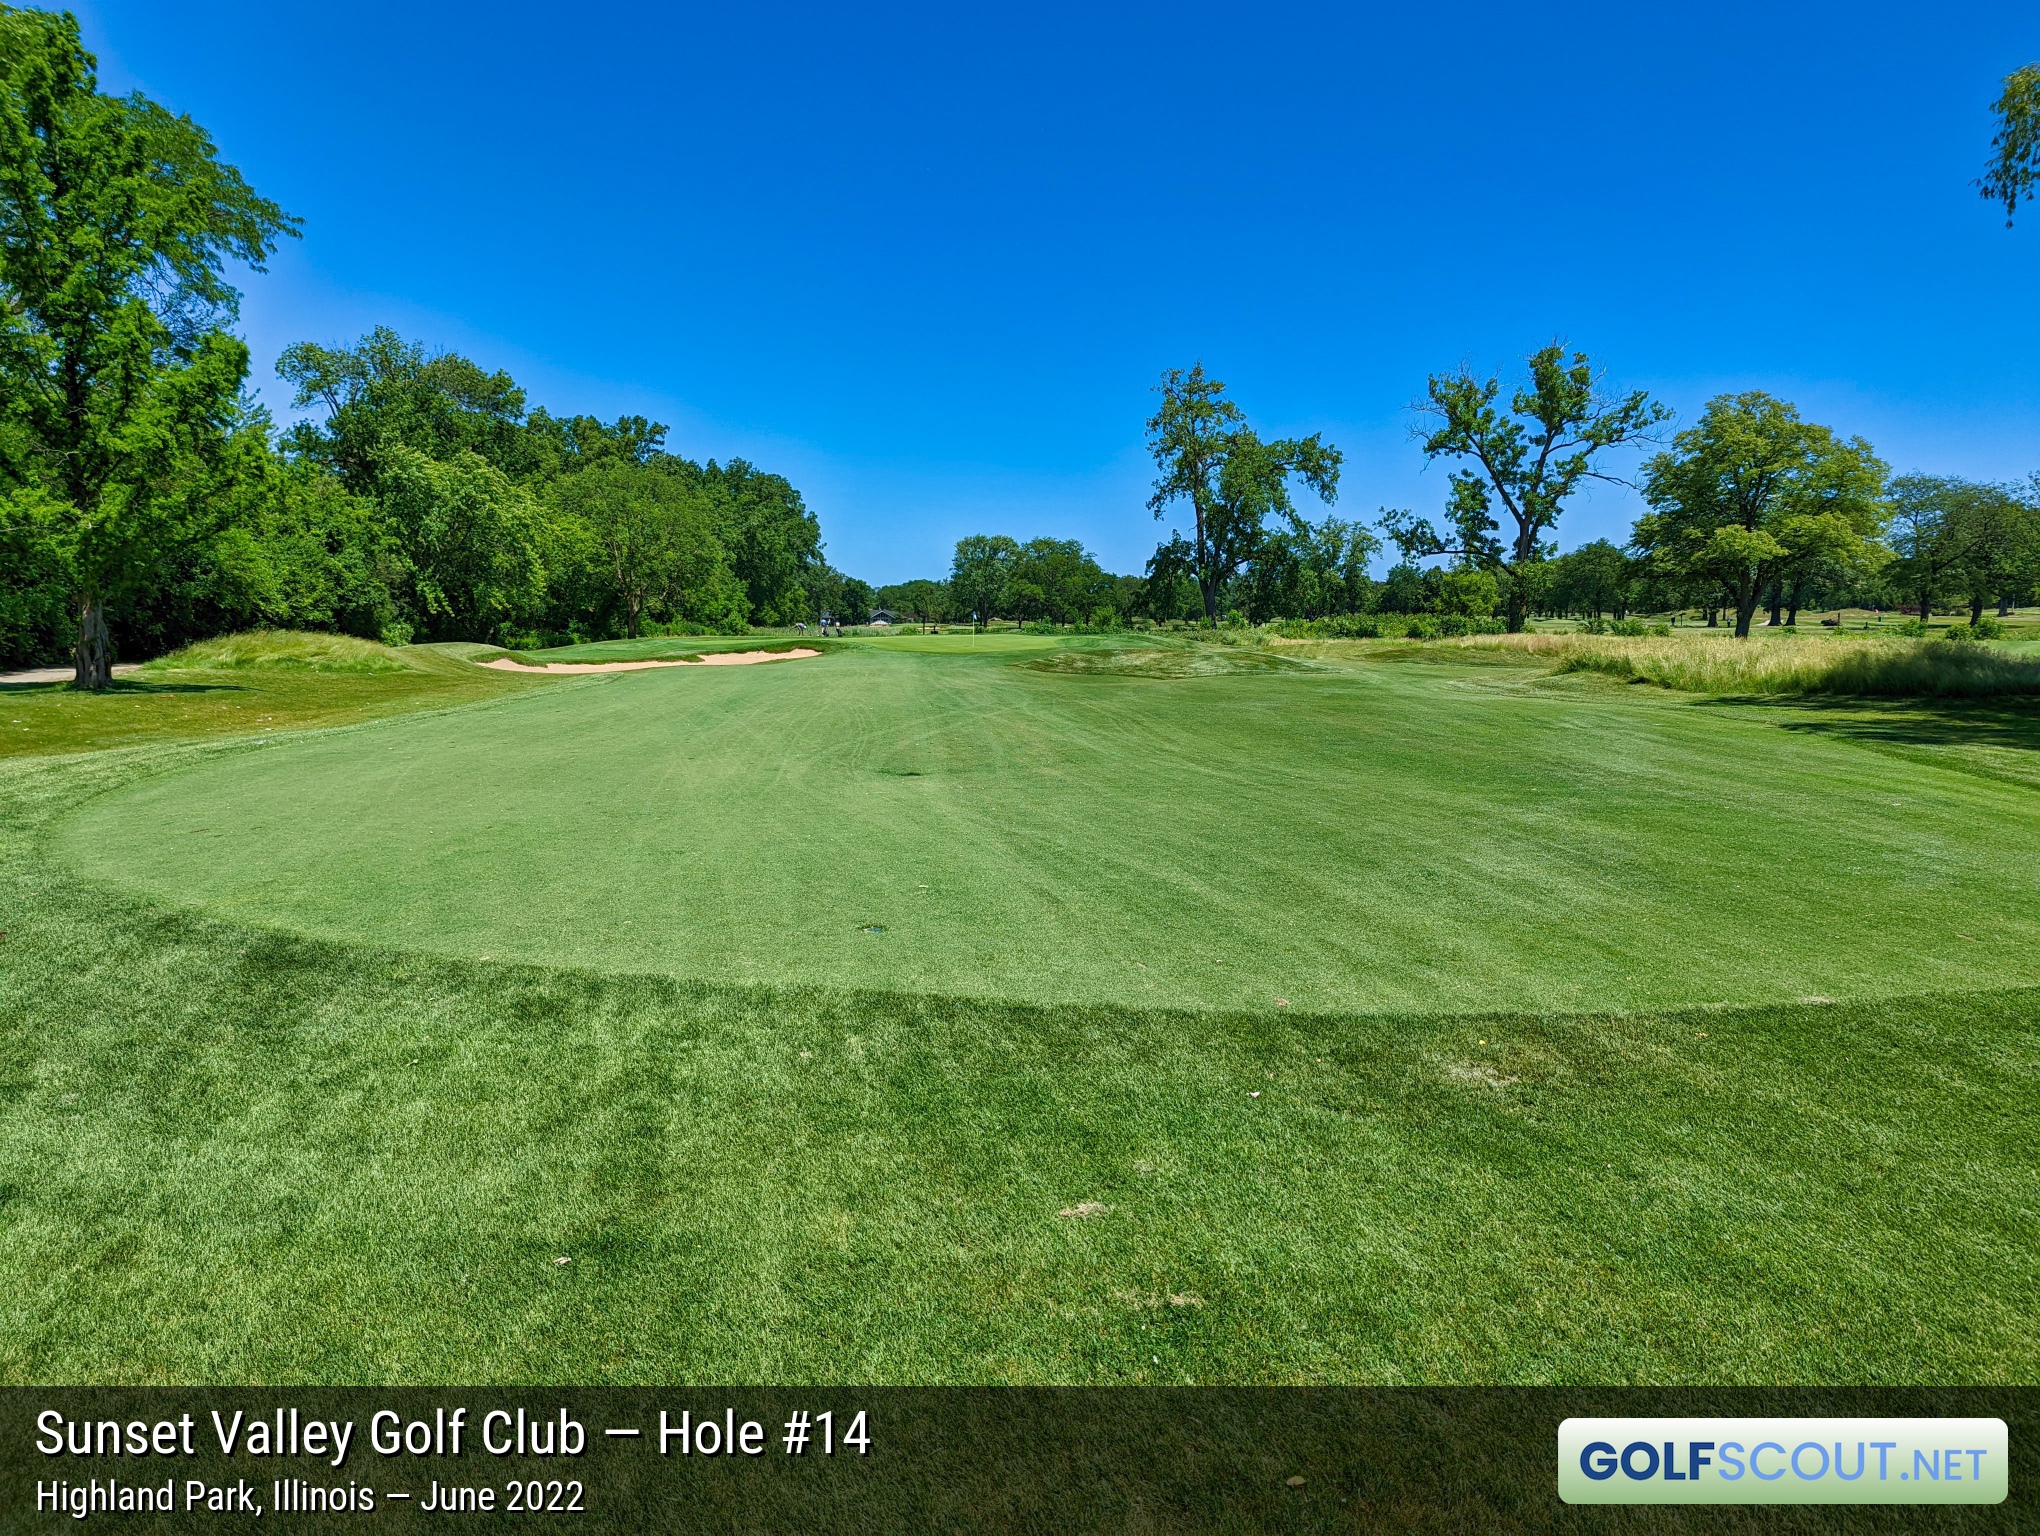 Photo of hole #14 at Sunset Valley Golf Club in Highland Park, Illinois. 